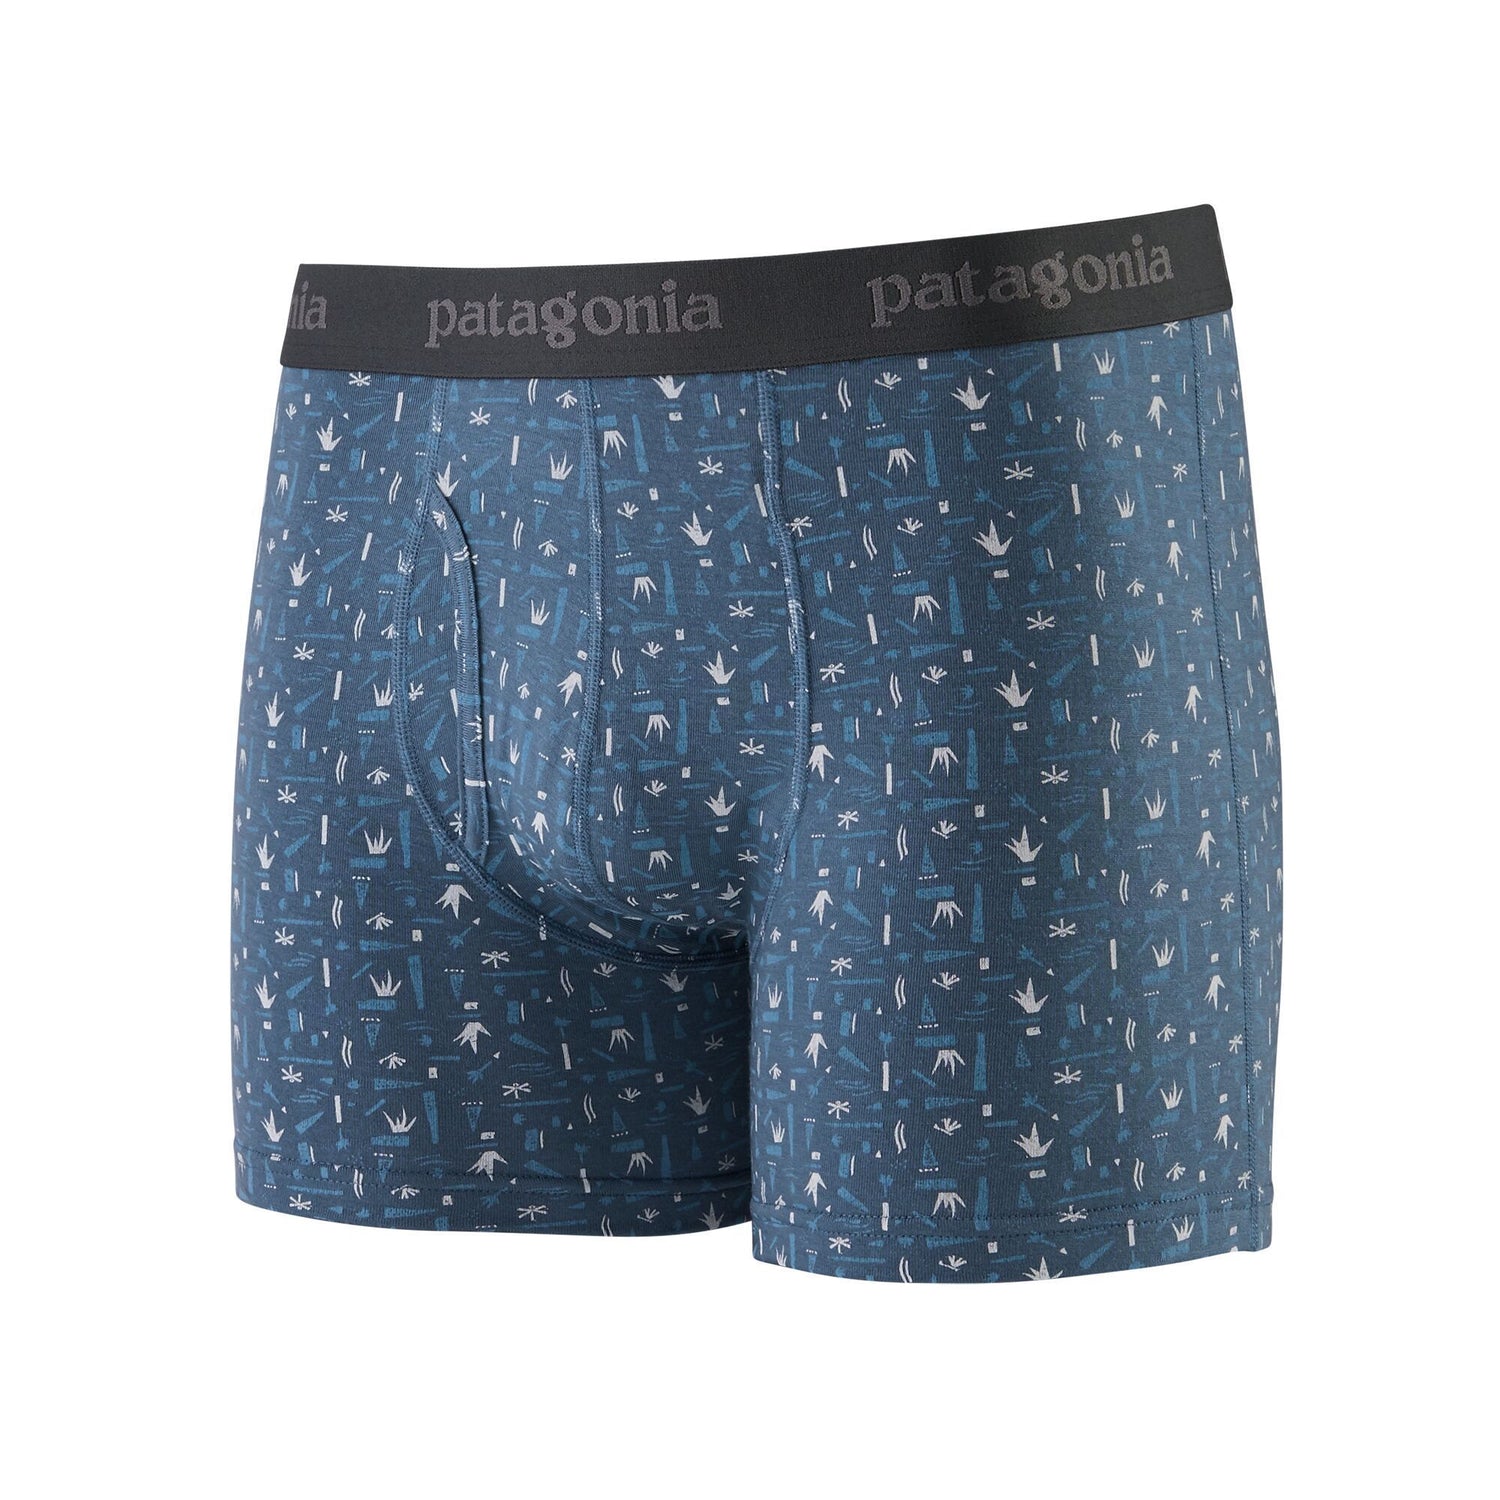 Patagonia M's Essential Boxer Briefs - From Wood-based TENCEL Fathom Stripe: New Navy 6